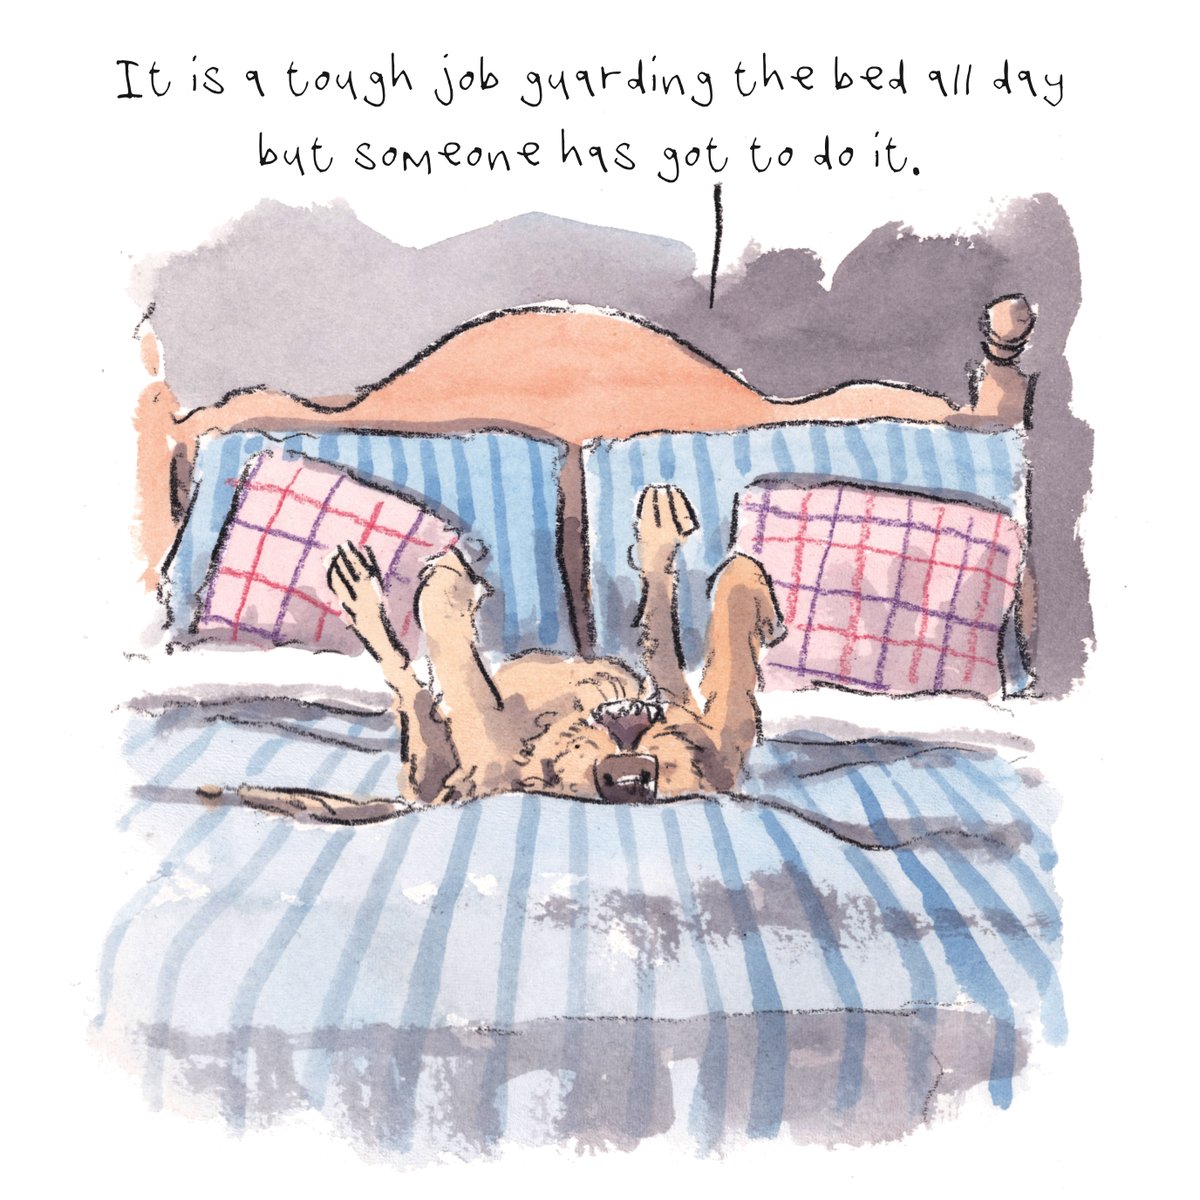 I hope that you are having a really fab day so far, lovely people and lovely dogs.
It is a tough job guarding the bed all day. 
I'm wishing you the very best for the rest of your day. 
#hoorayfordogs #toughjob